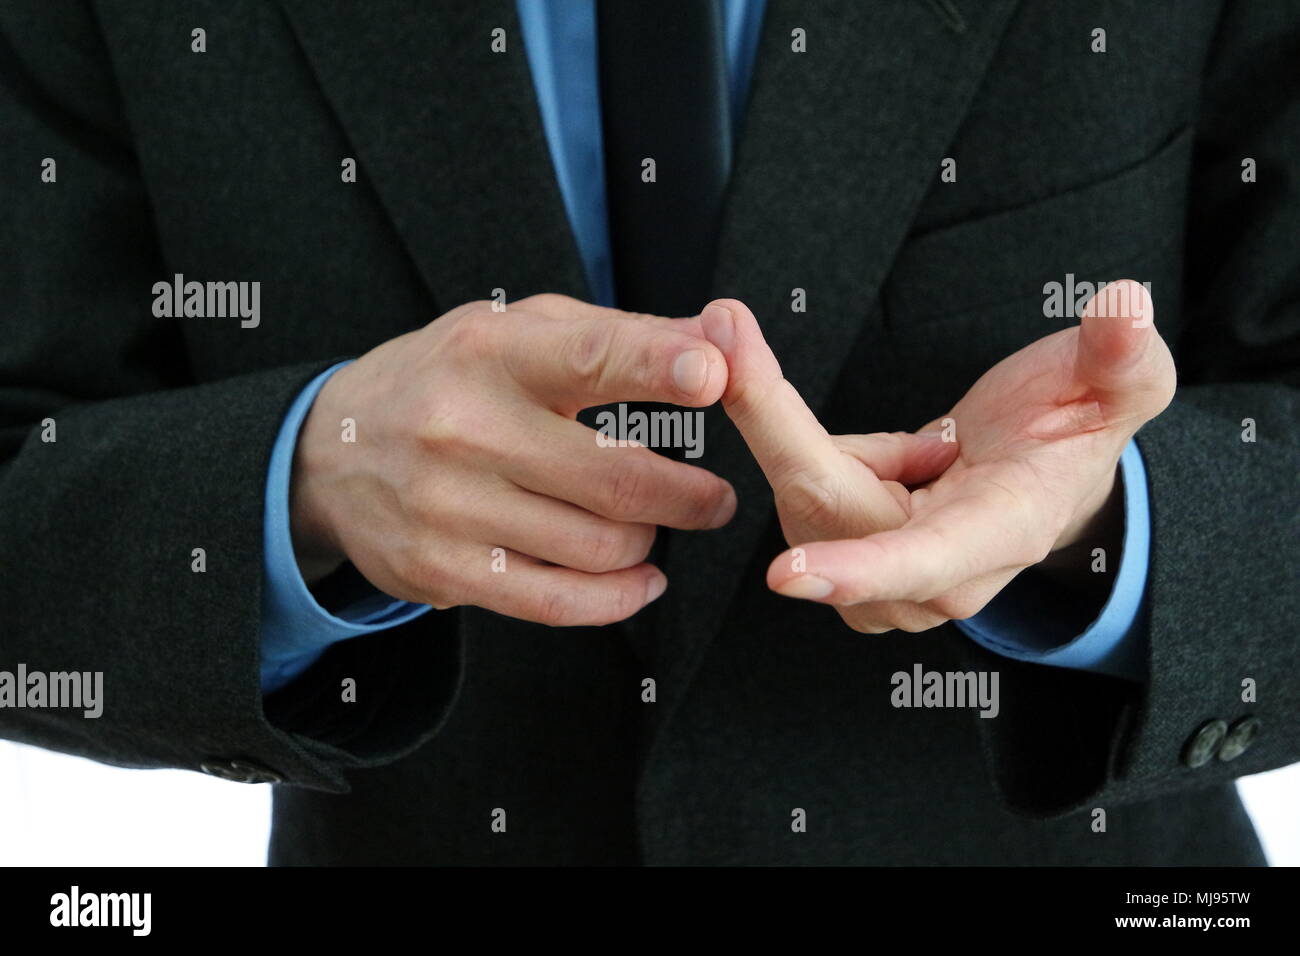 Enumerating with fingers Stock Photo